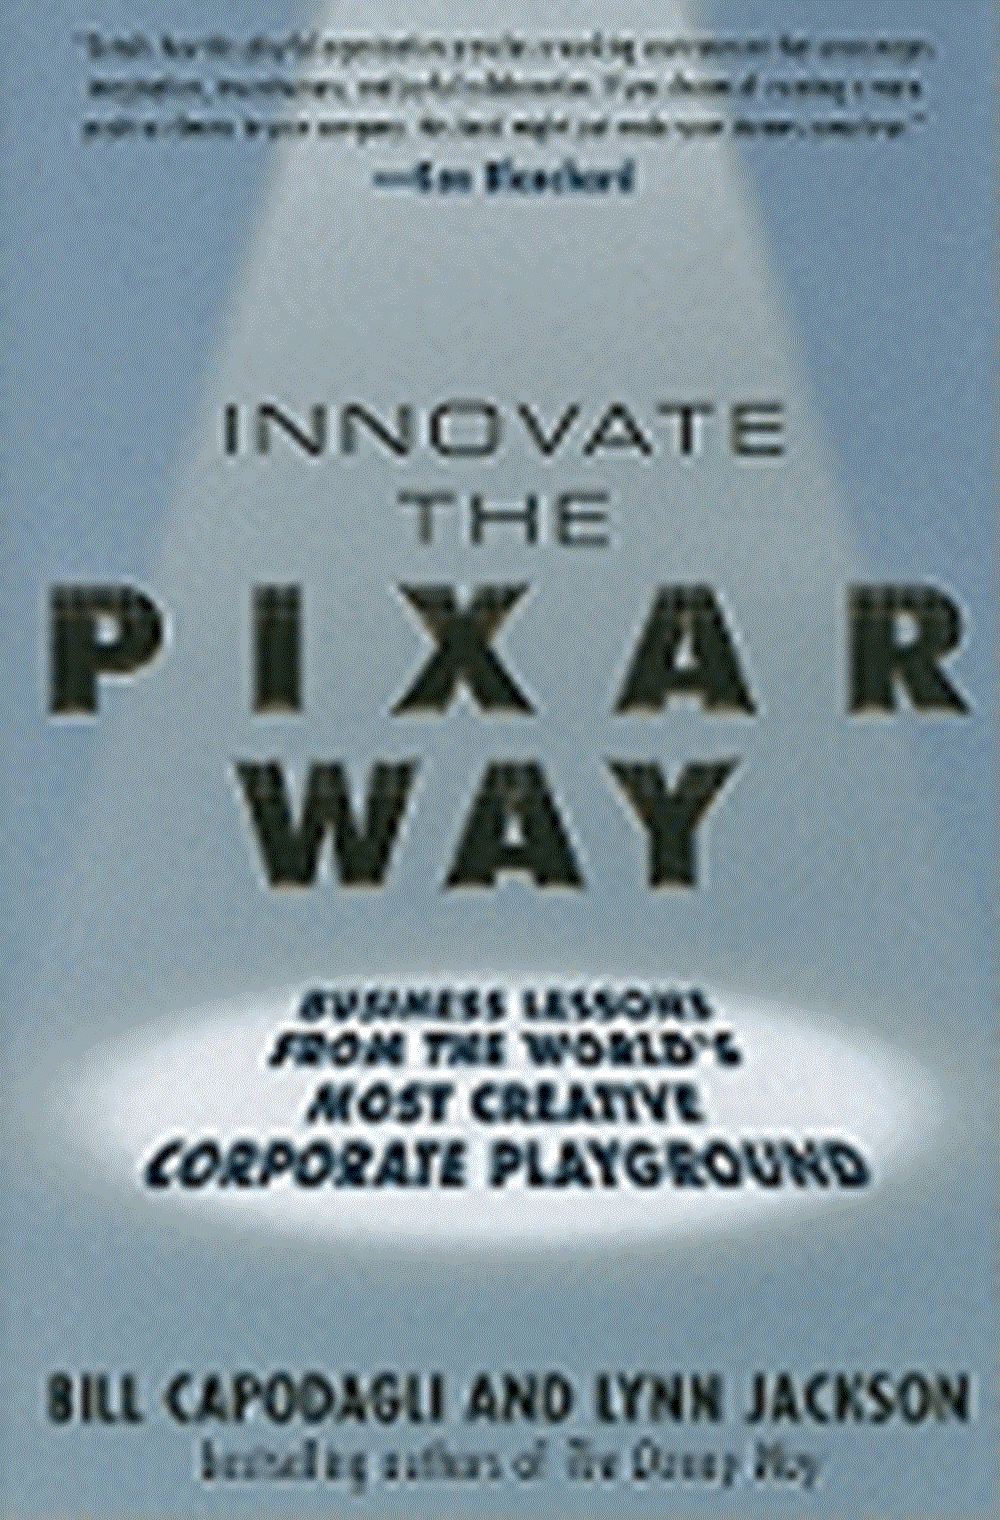 Innovate the Pixar Way Business Lessons from the World's Most Creative Corporate Company